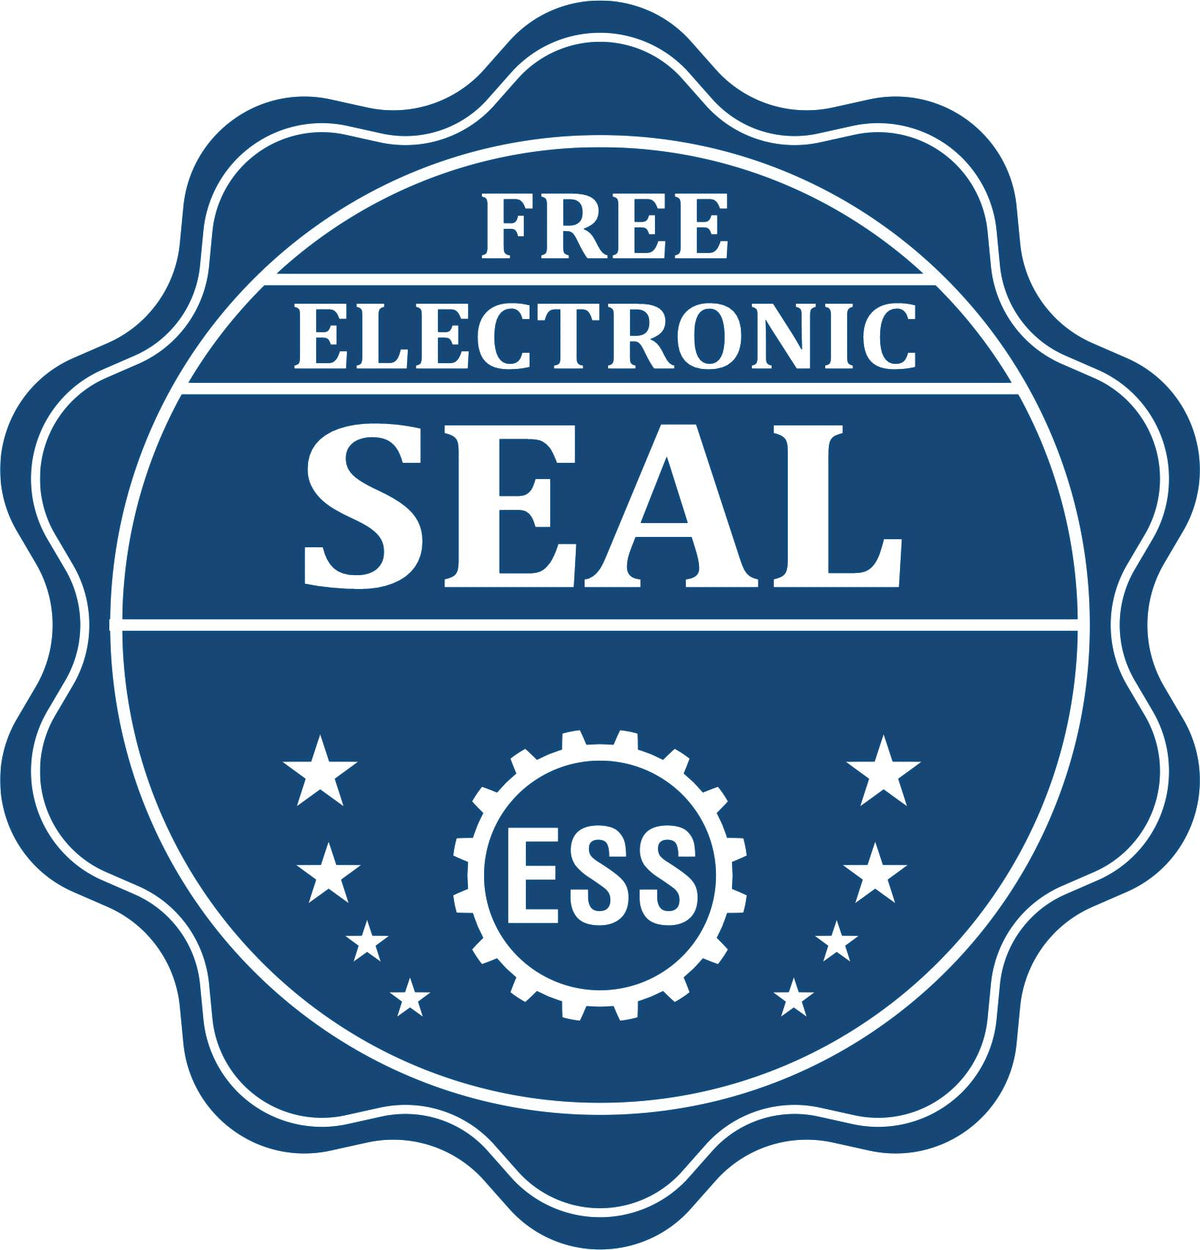 A badge showing a free electronic seal for the Premium MaxLight Pre-Inked Rhode Island Engineering Stamp with stars and the ESS gear on the emblem.